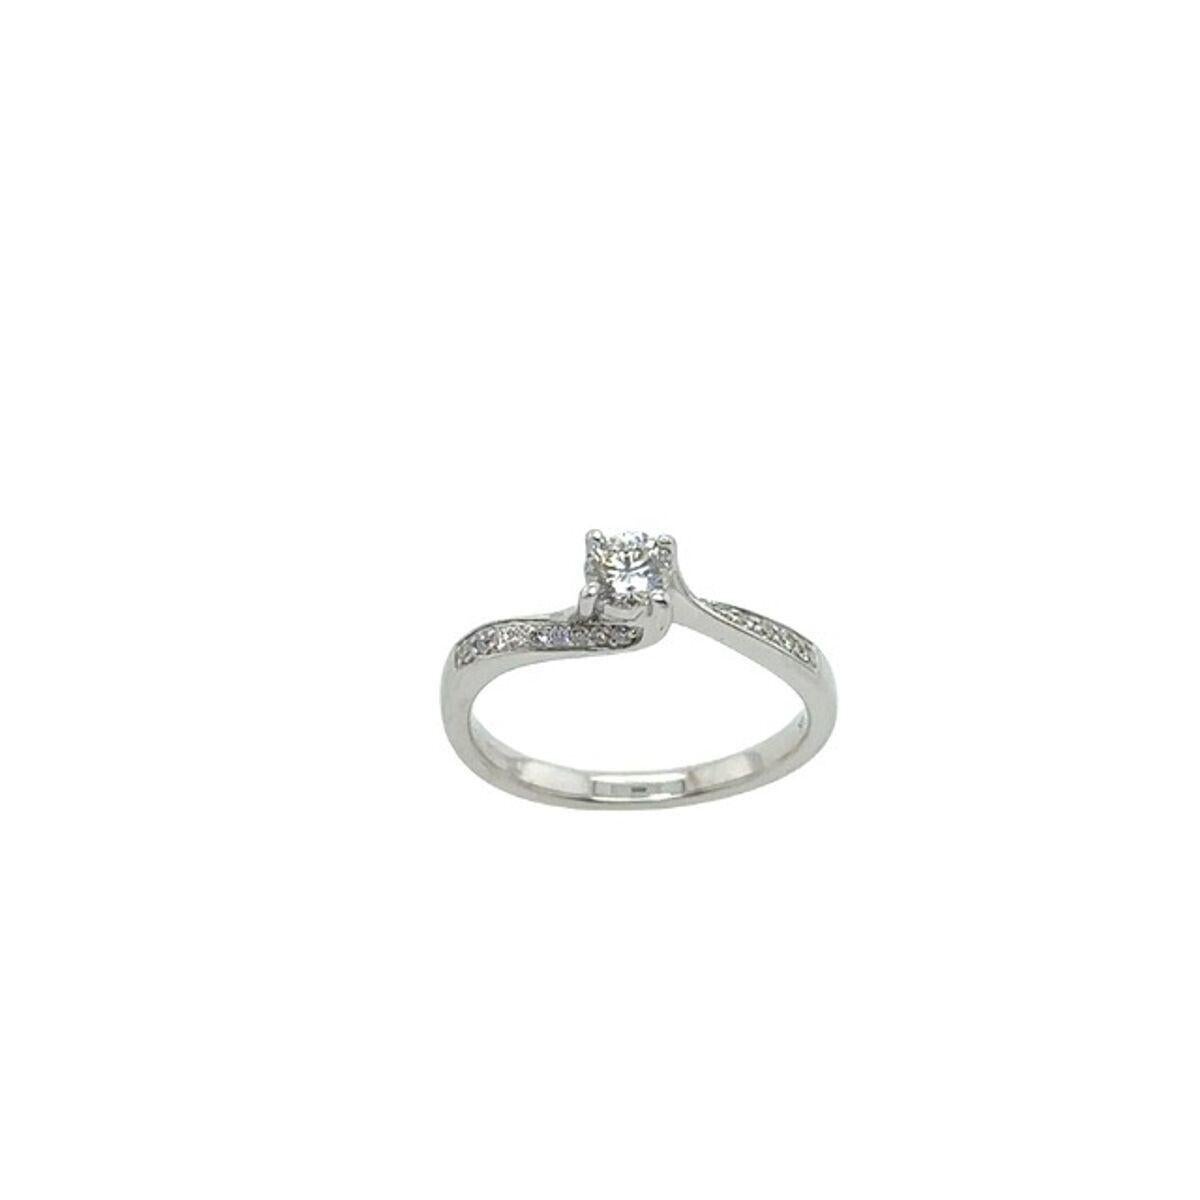 18ct White Gold Solitaire Diamond Ring, Set with Diamonds on Shoulders, 0.30ct

Additional Information:
Total Diamond Weight: 0.30ct
Diamond Colour: H
Diamond Clarity: SI1
Width of Band: 4mm
Length of Head: 19mm 
Total Weight: 3.1g 
Ring Size: